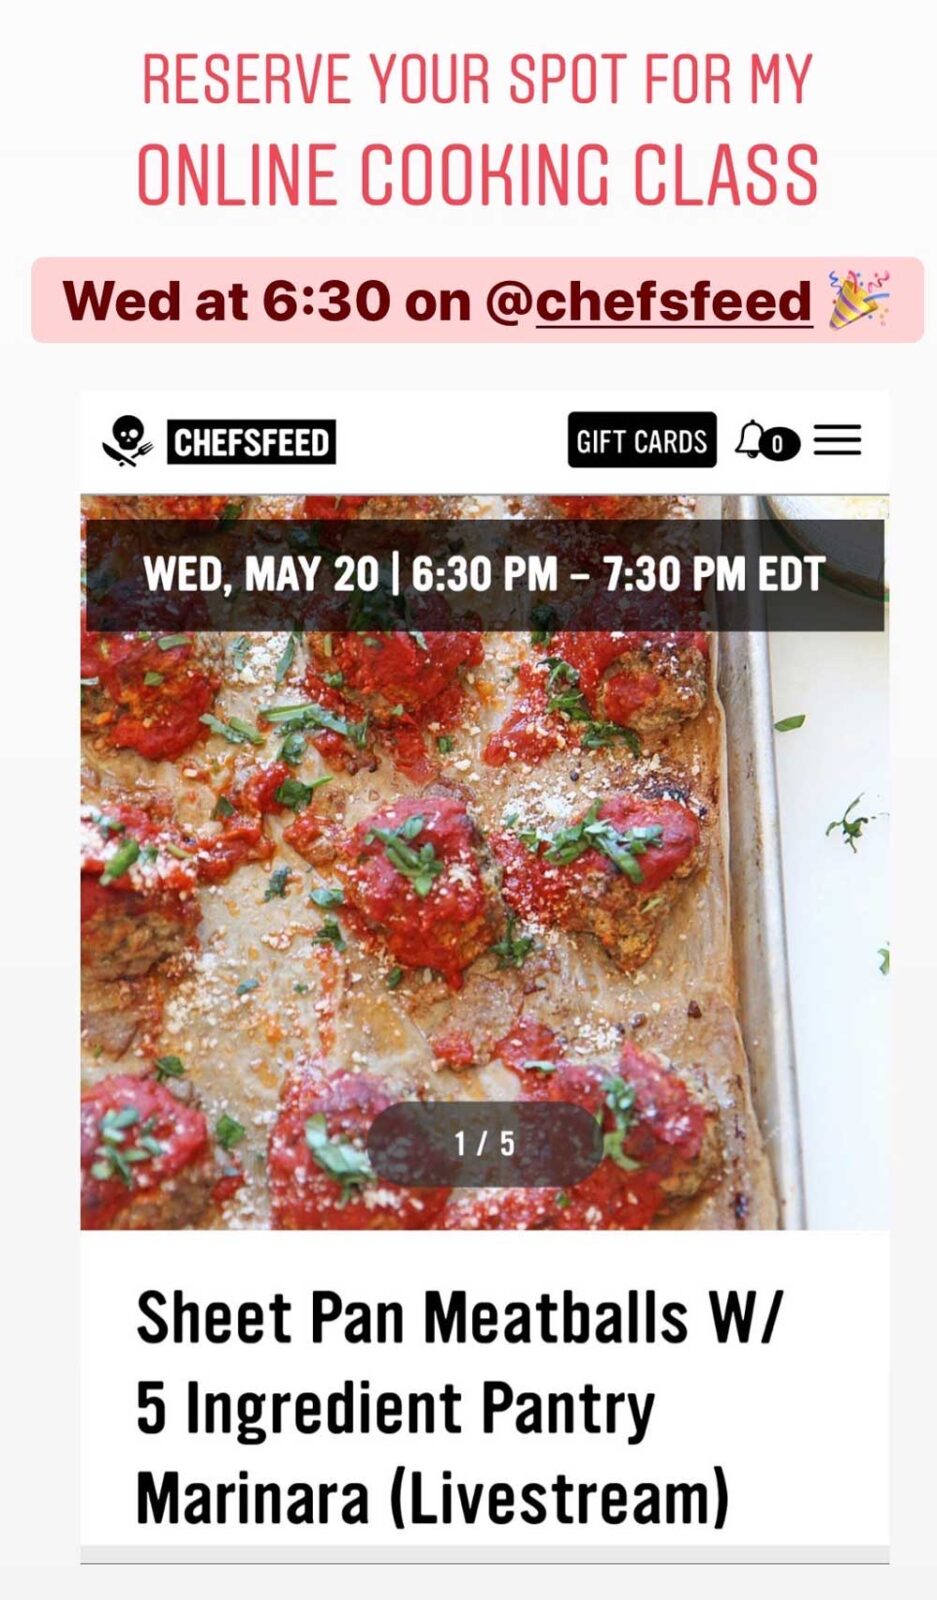 Meatballs and Marinara Cooking Class . This Wednesday May20th. Meatballs cooked on a sheet tray and 5 ingredient marinara! Happy Cooking! www.ChopsHapy.com #cookingclass #onlinecookingclass